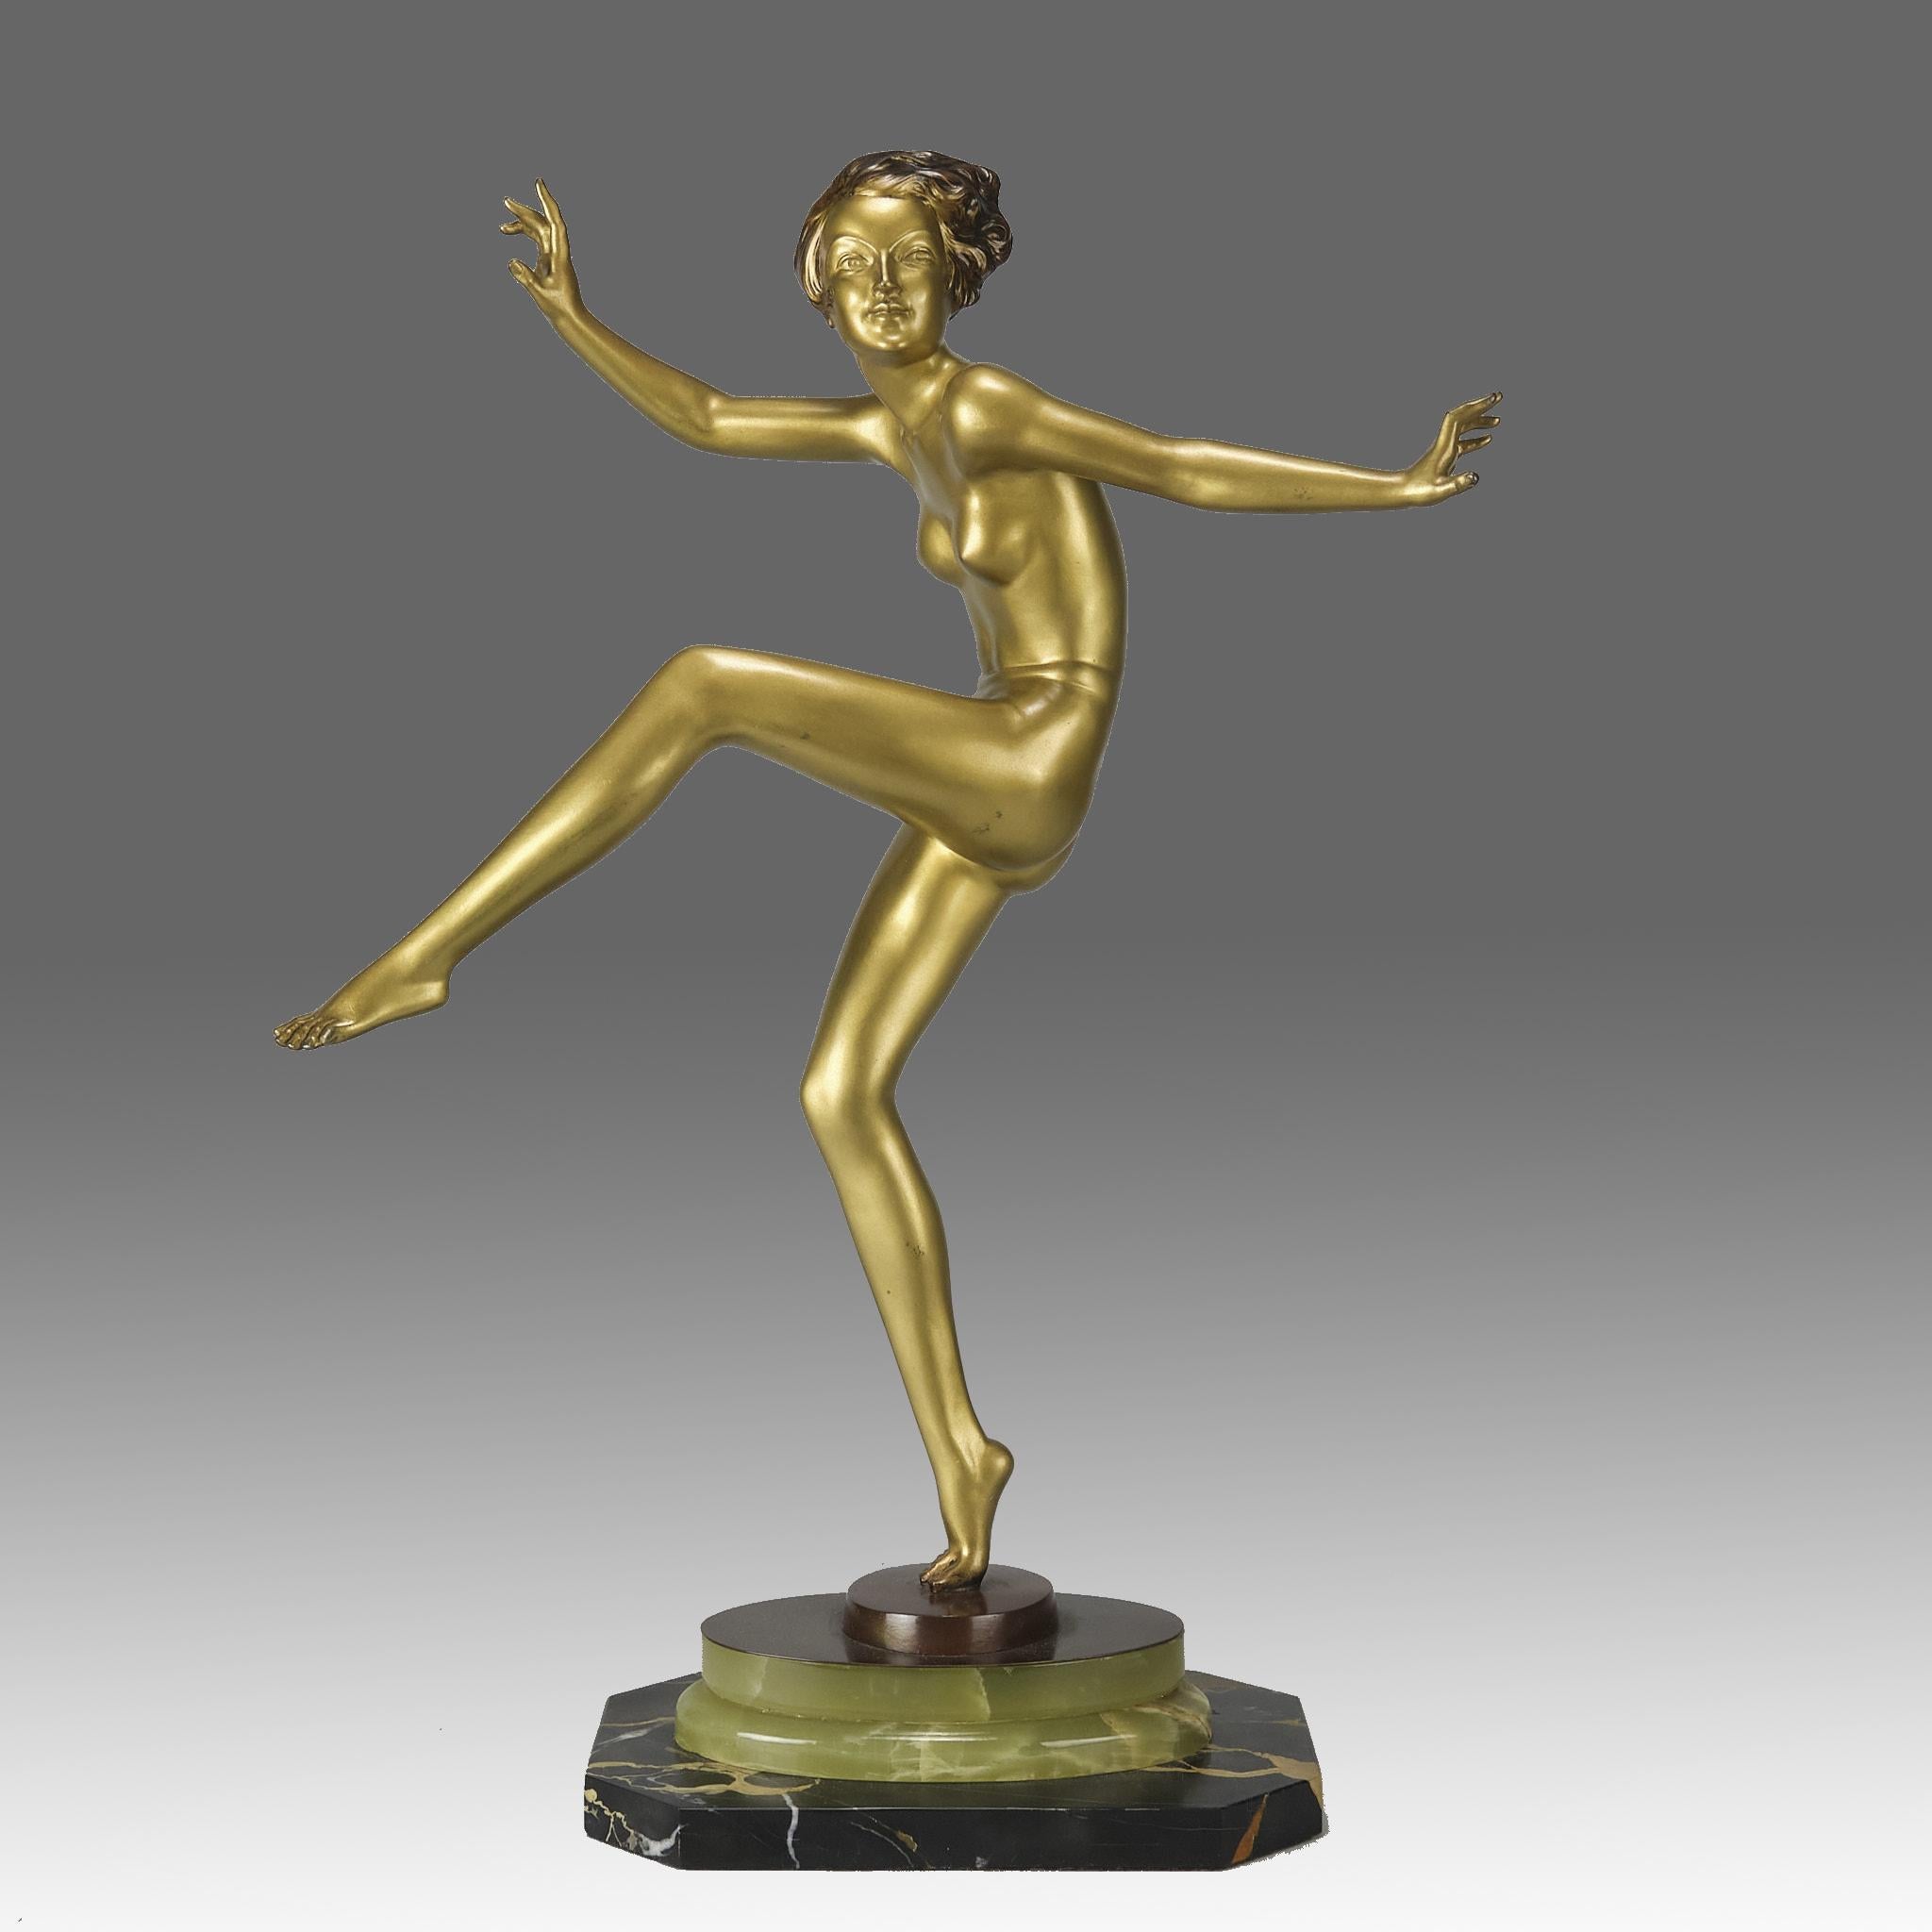 An impressive early 20th Century Art Deco cold painted gilt bronze figure of a young energetic beauty in a balanced dancing pose. The bronze exhibiting excellent colour and very fine hand chased surface detail, raised on a stepped onyx & marble base